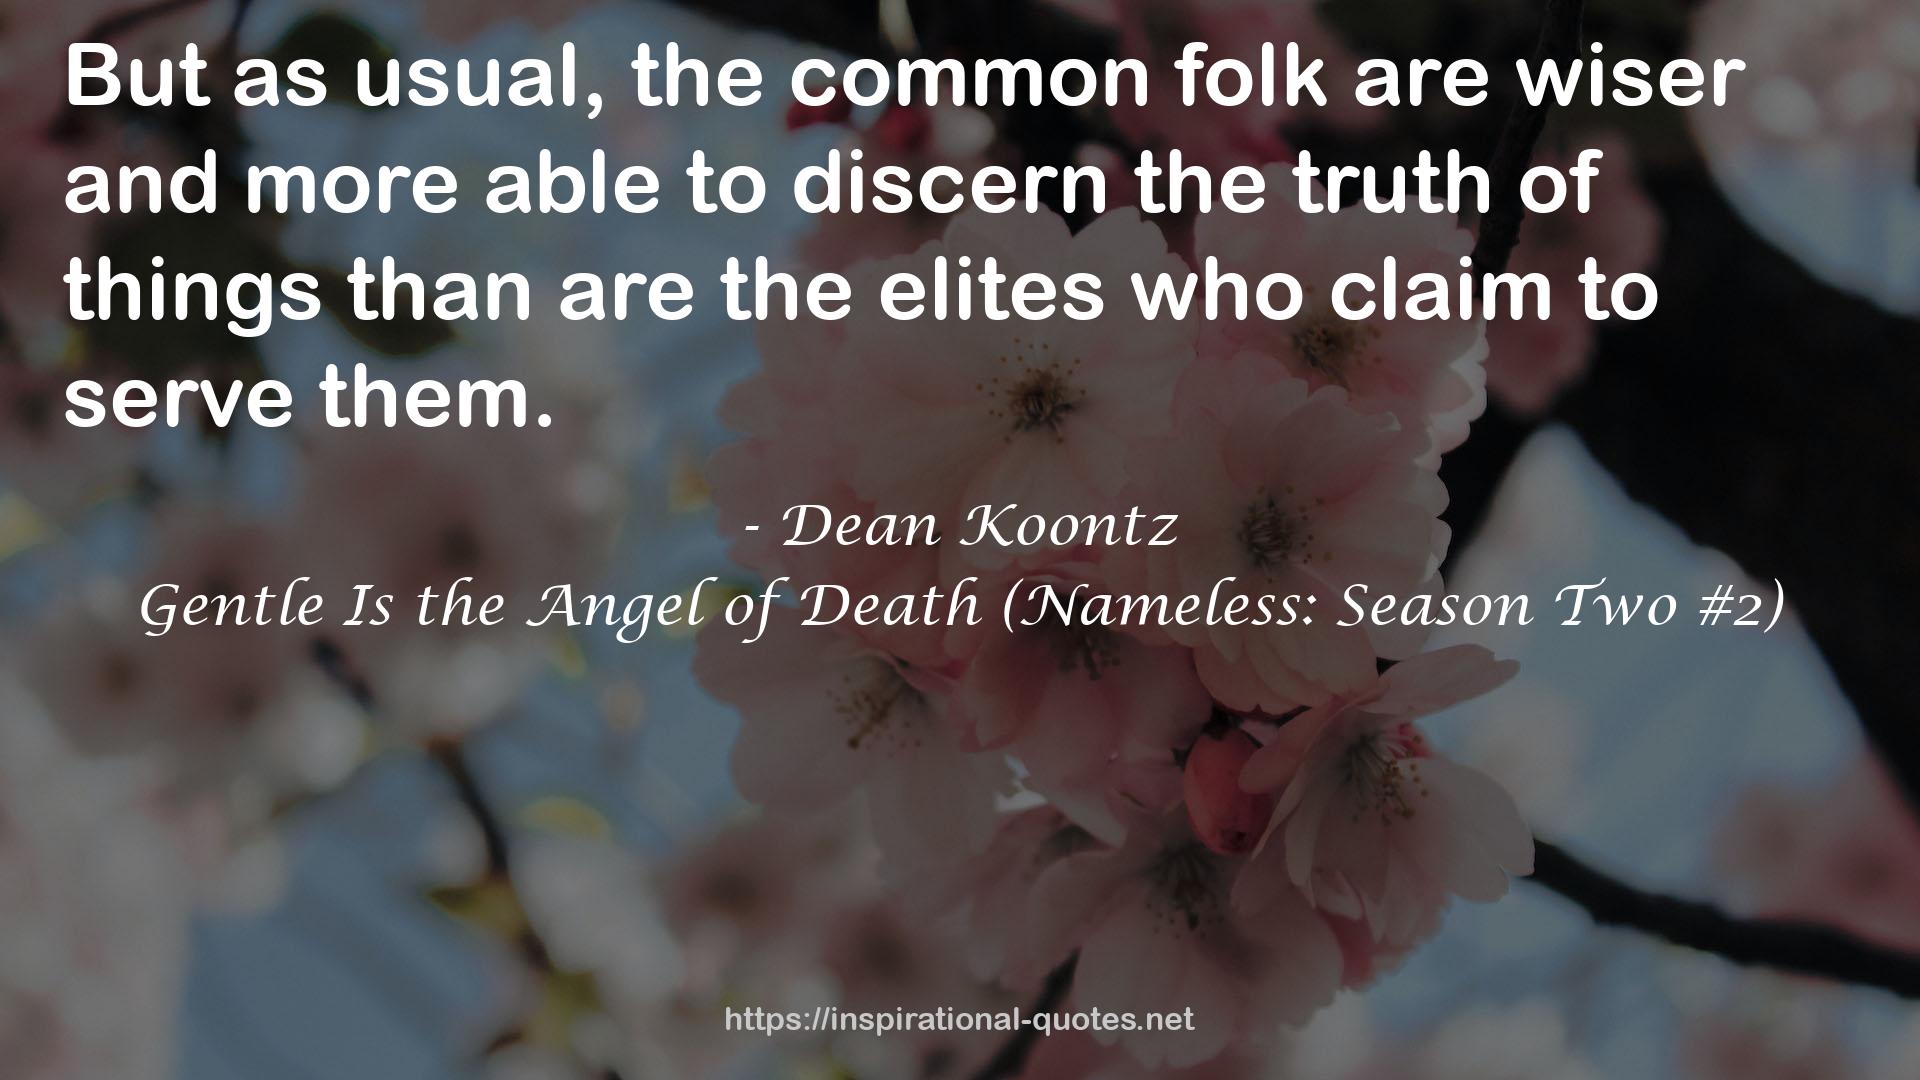 Gentle Is the Angel of Death (Nameless: Season Two #2) QUOTES